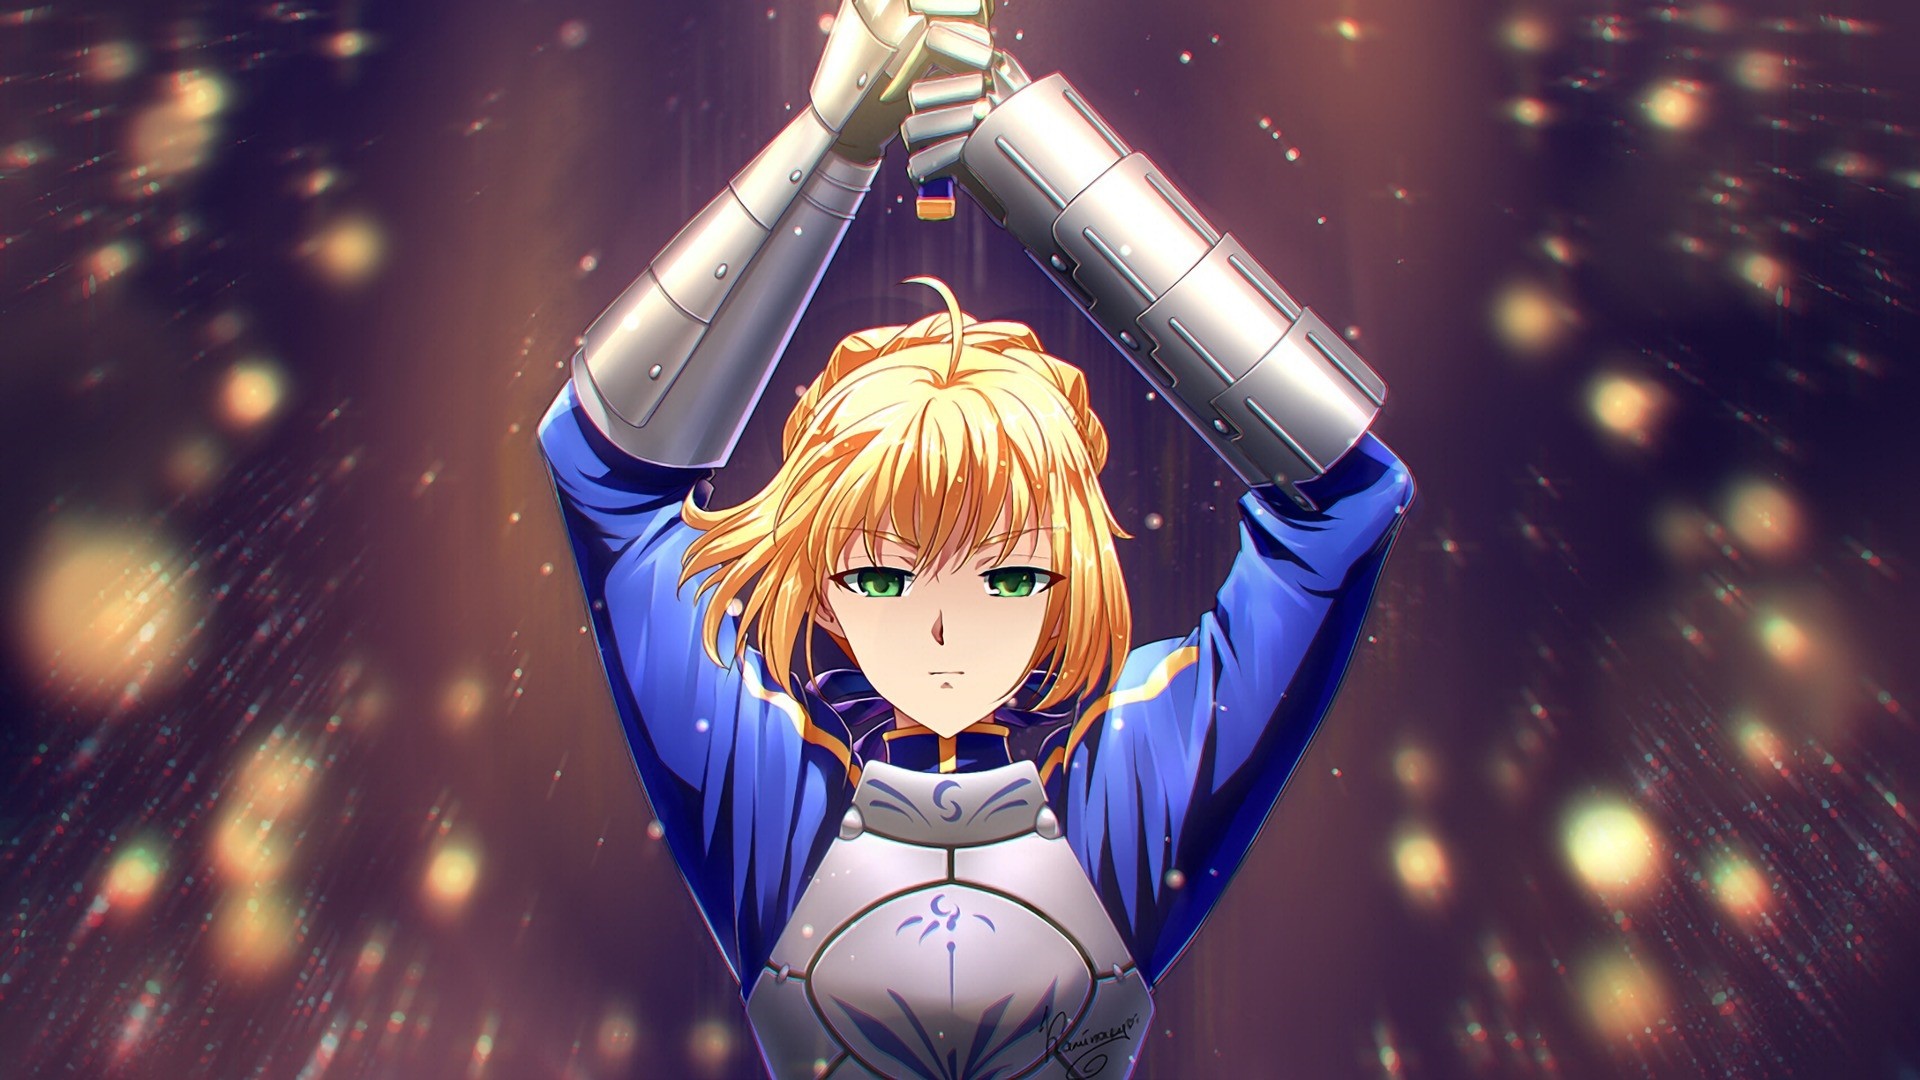 Fate Stay Night Saber Wallpaper For Pc